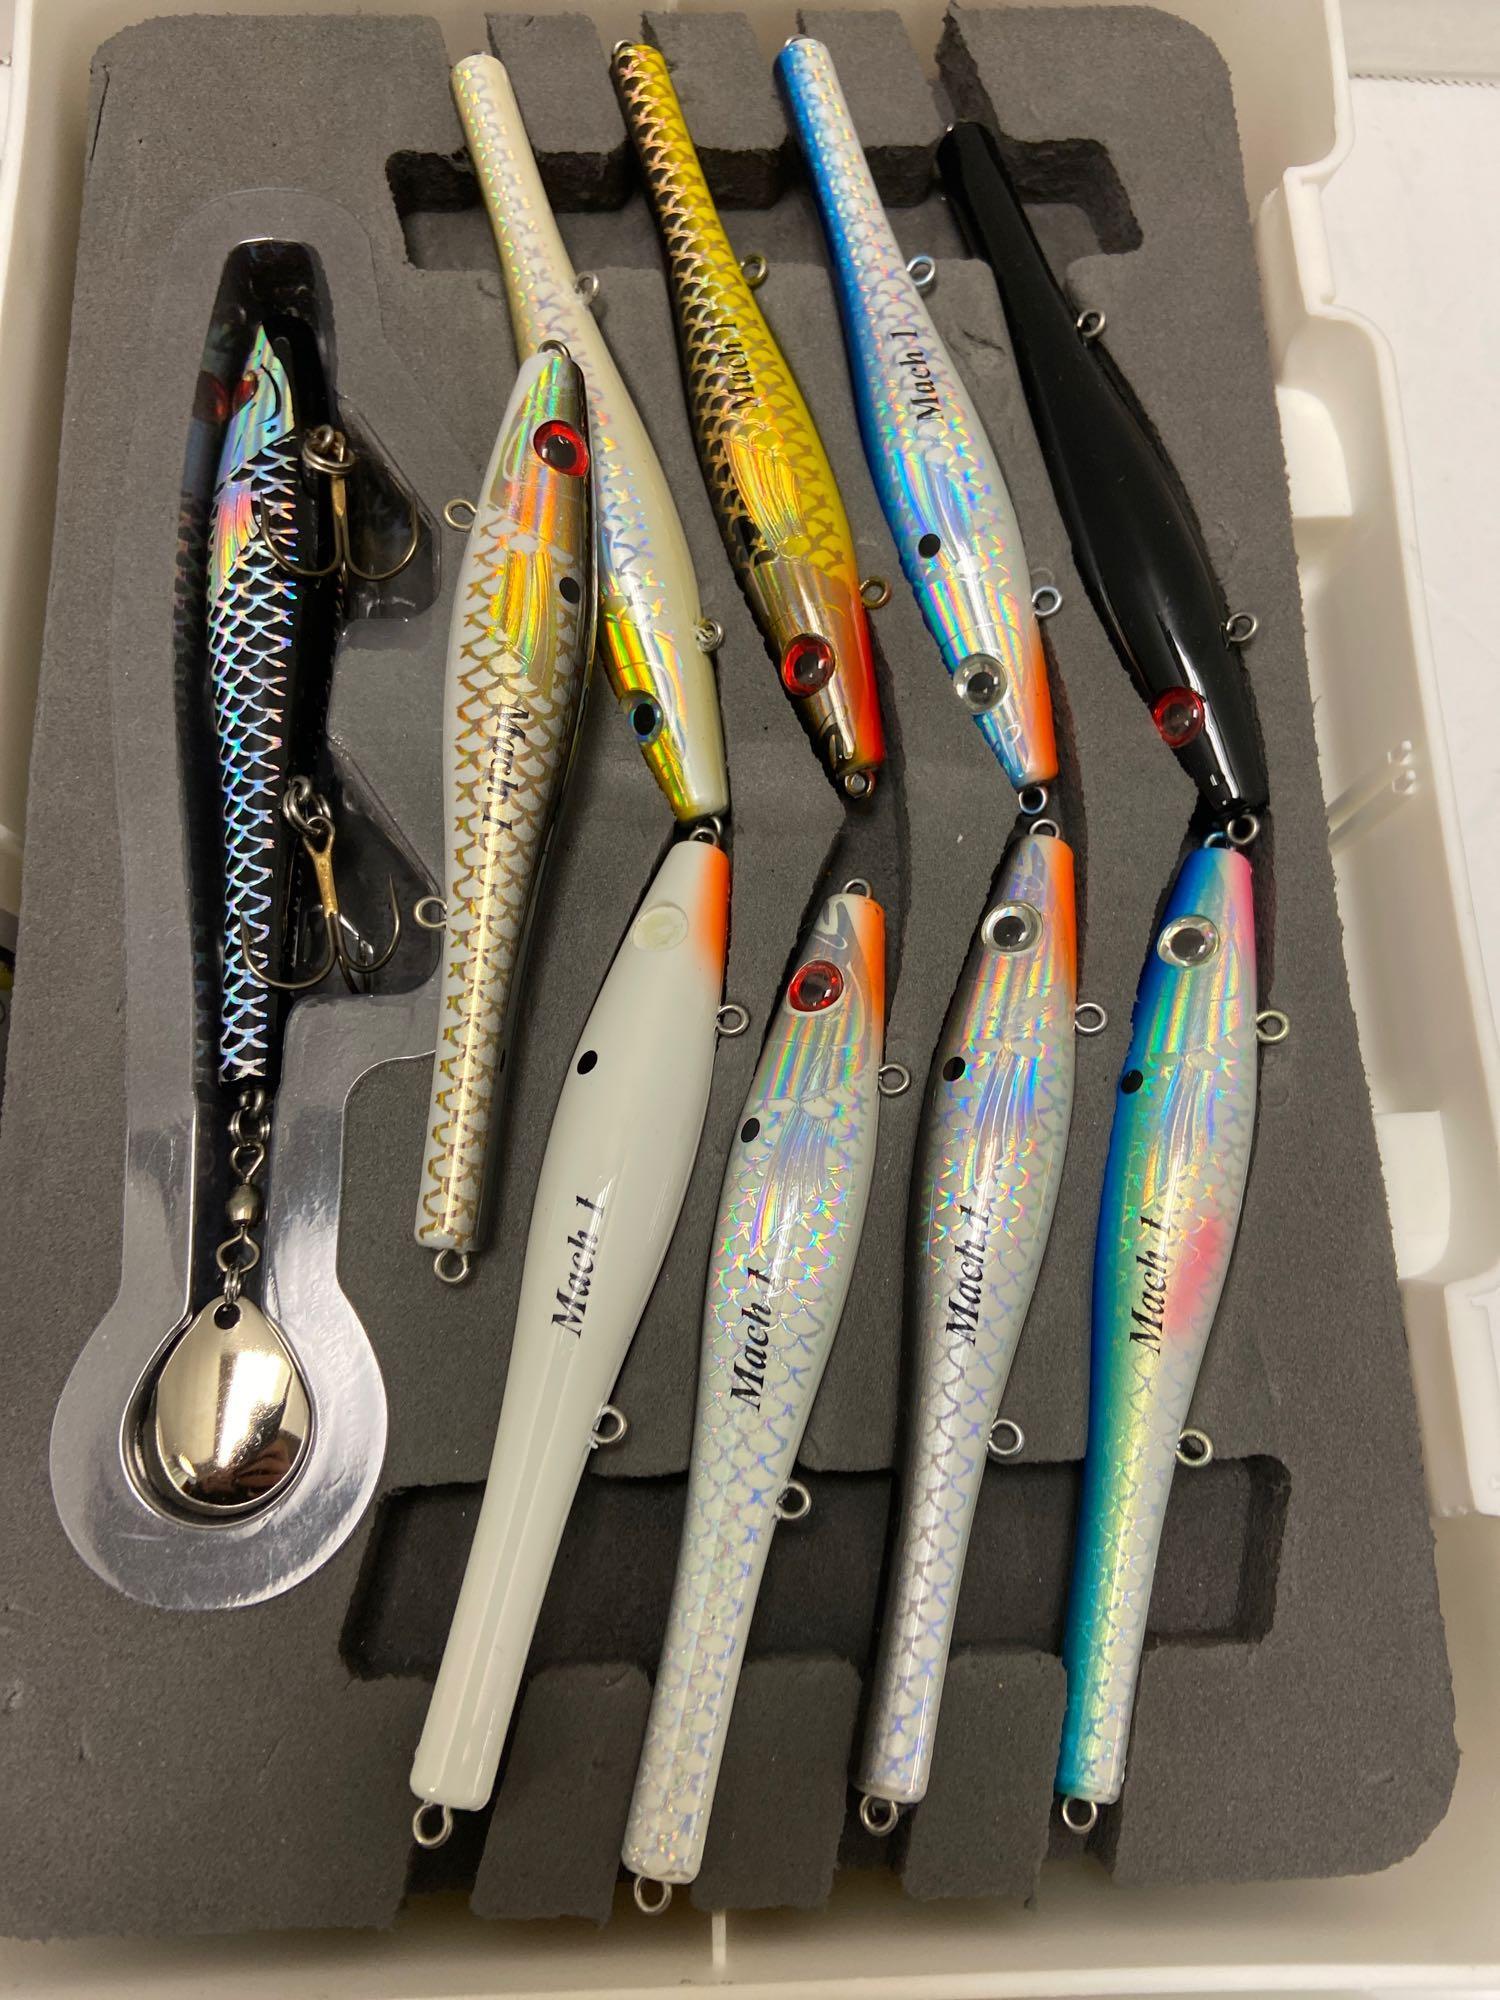 20) Mach 1 Top Water Fishing Lures with Cases